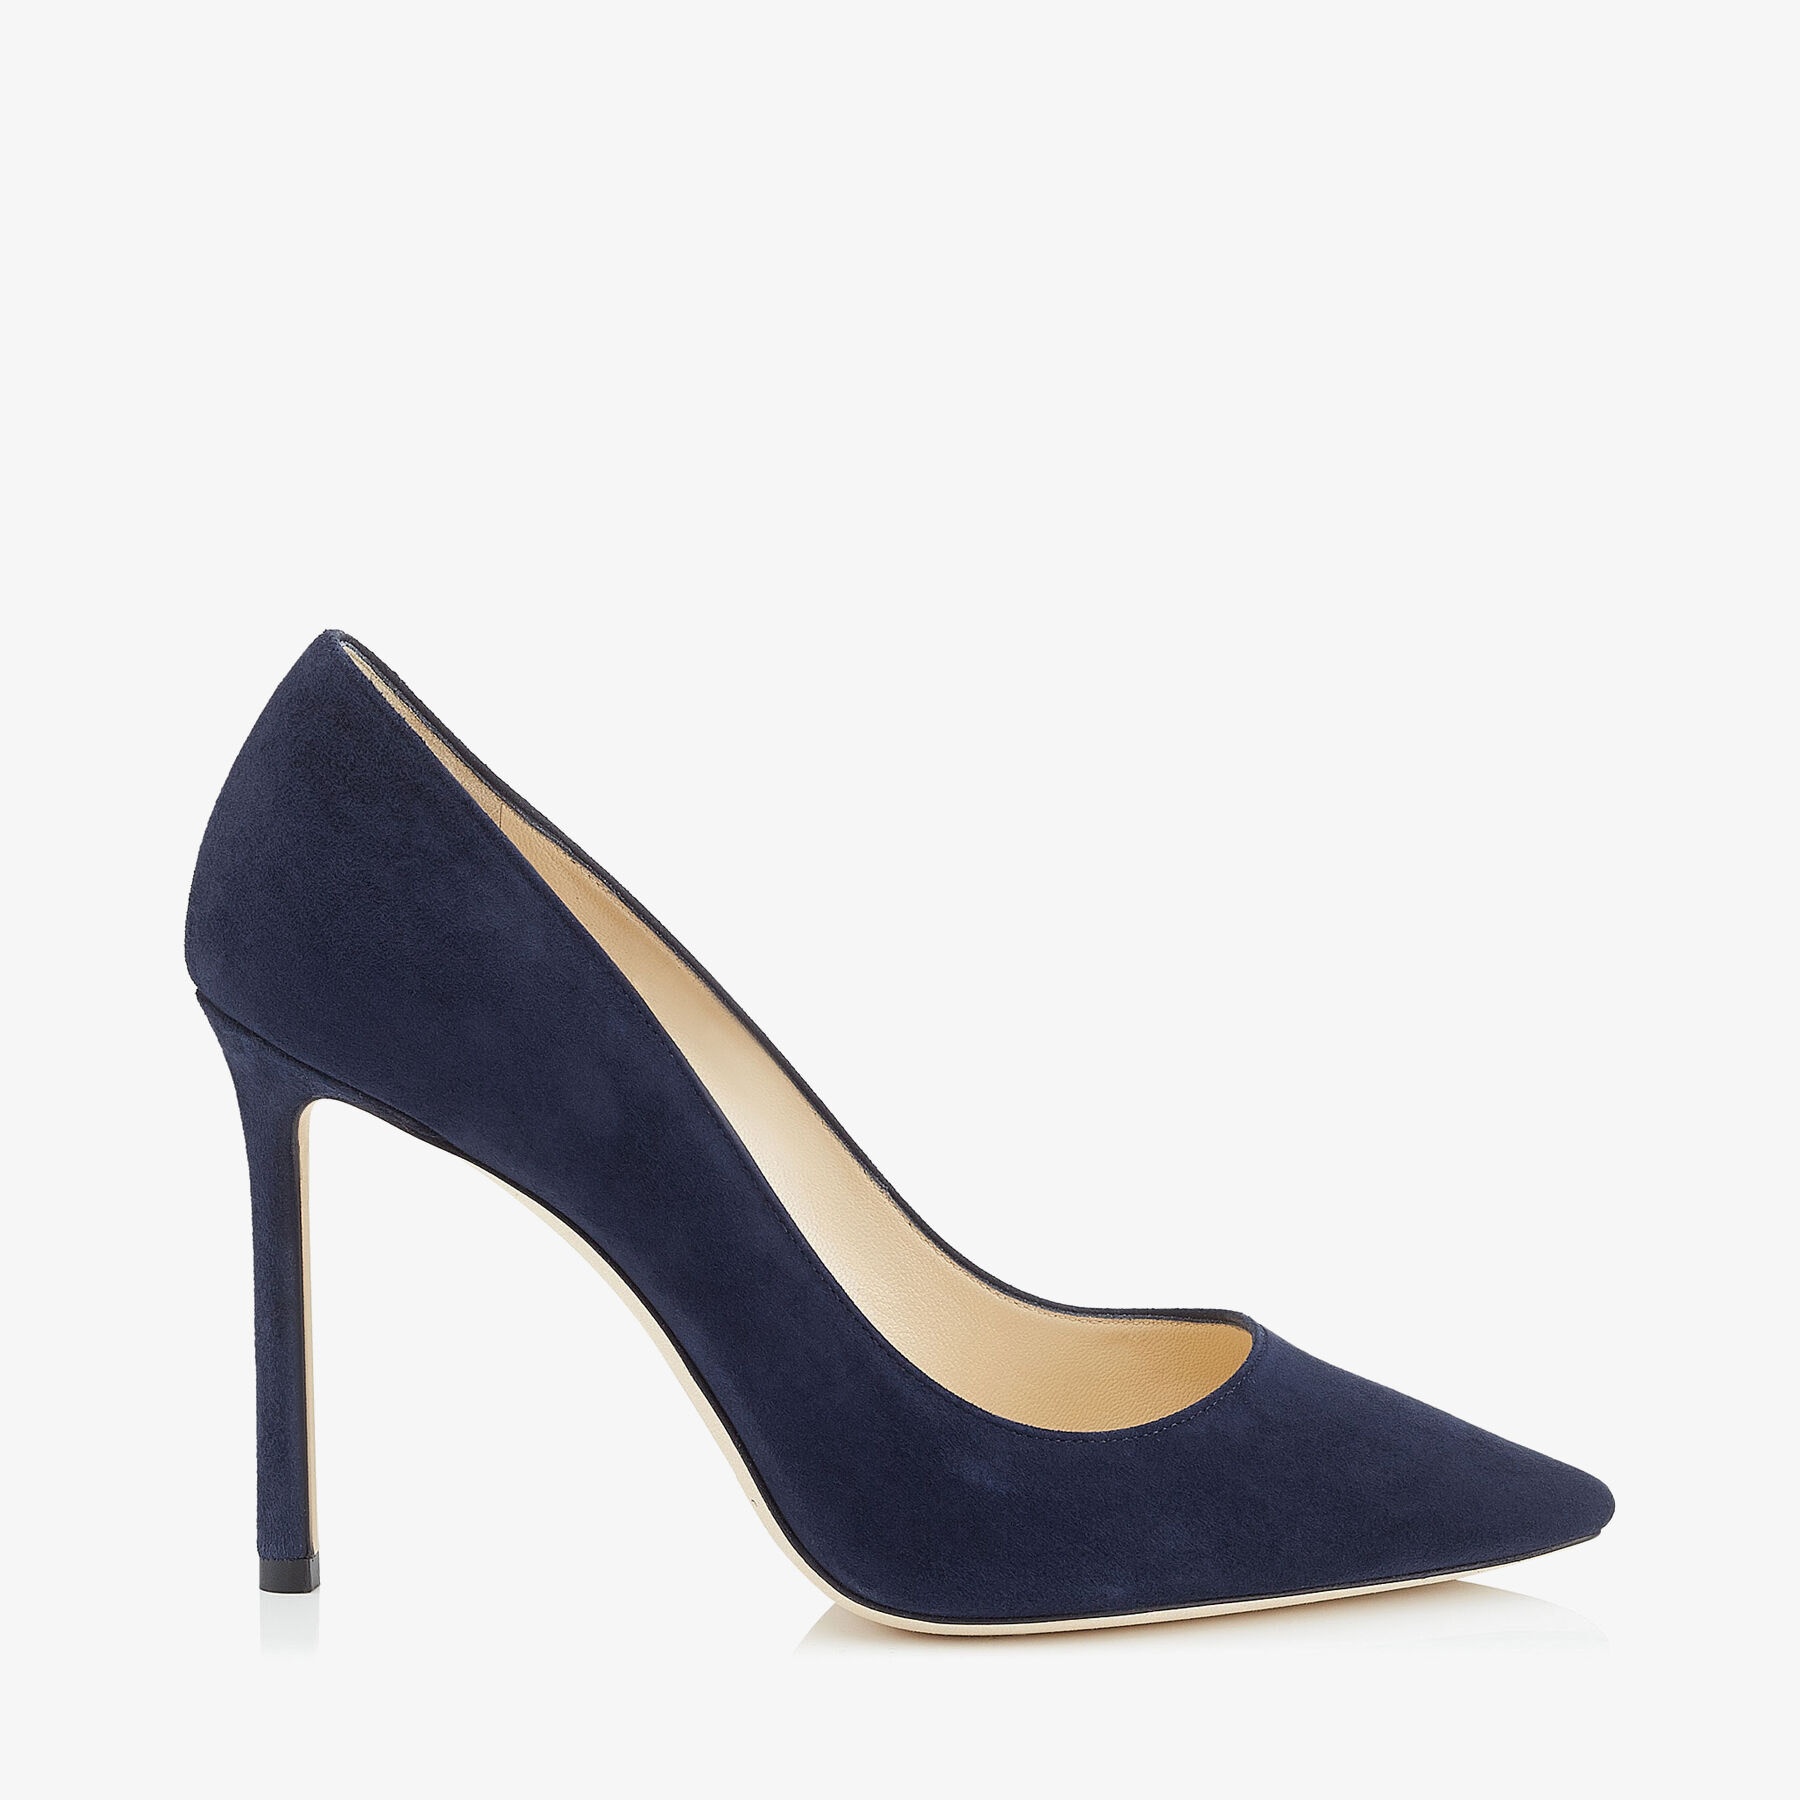 Romy 100
Navy Suede Pointed Pumps - 1